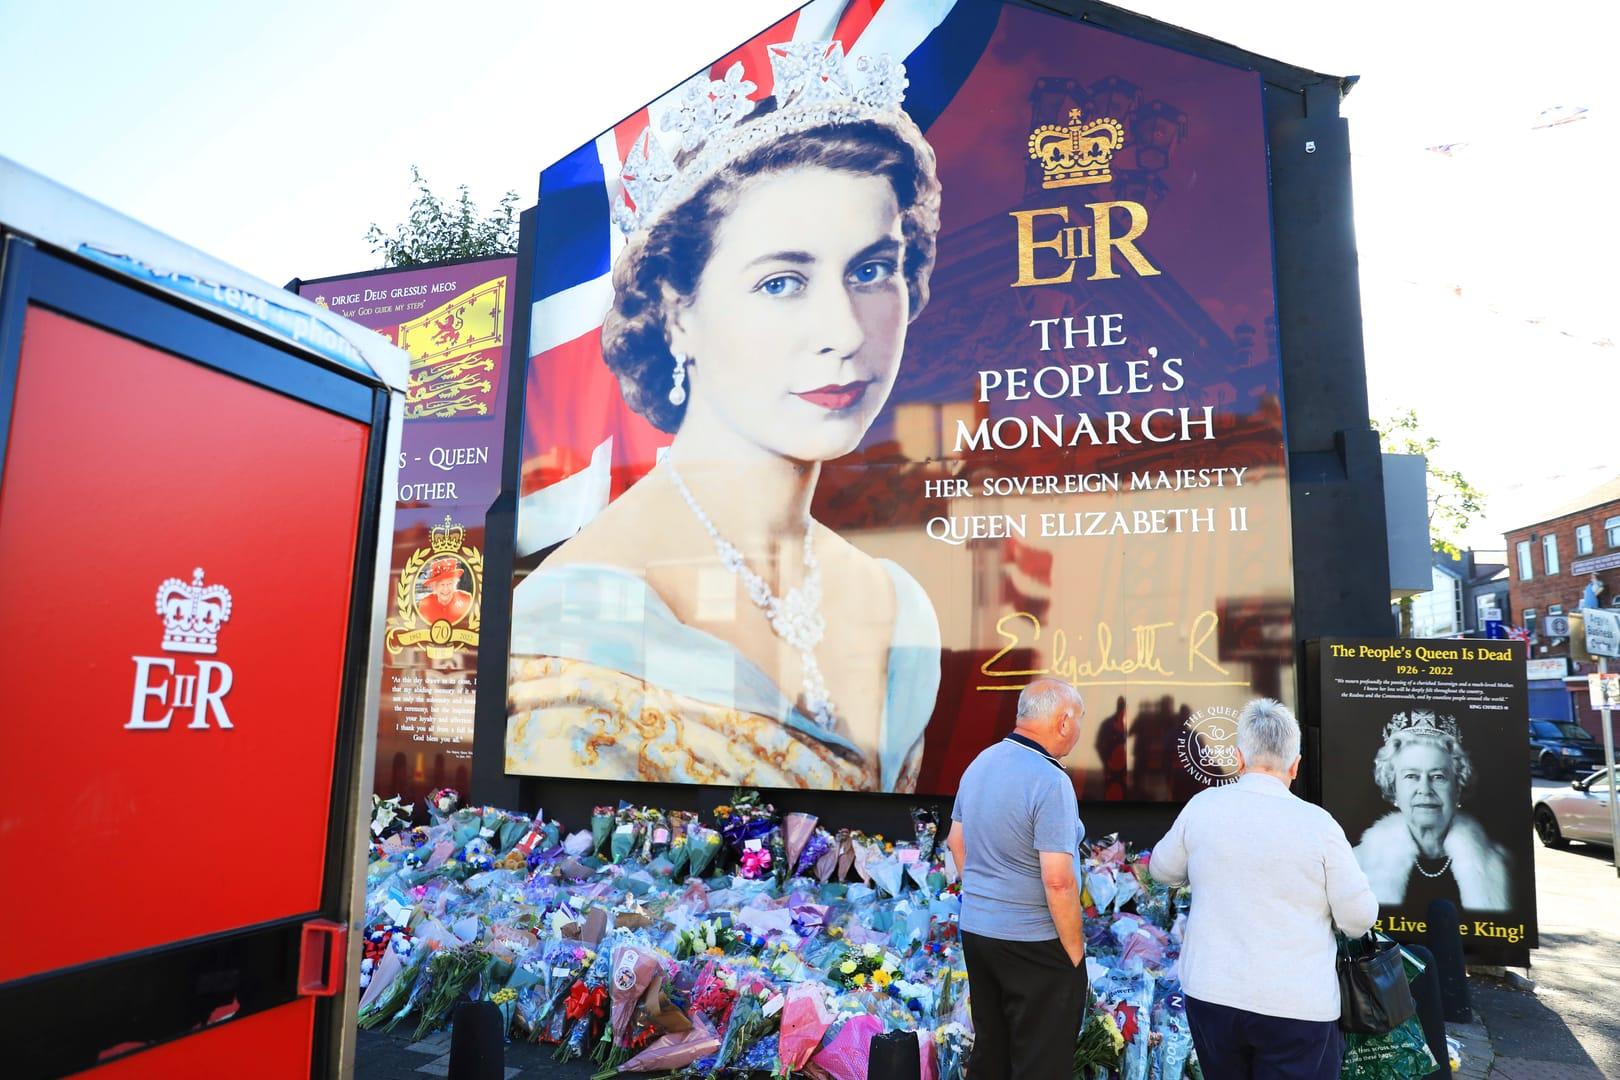 In Northern Ireland, praise for monarchy vies with disdain